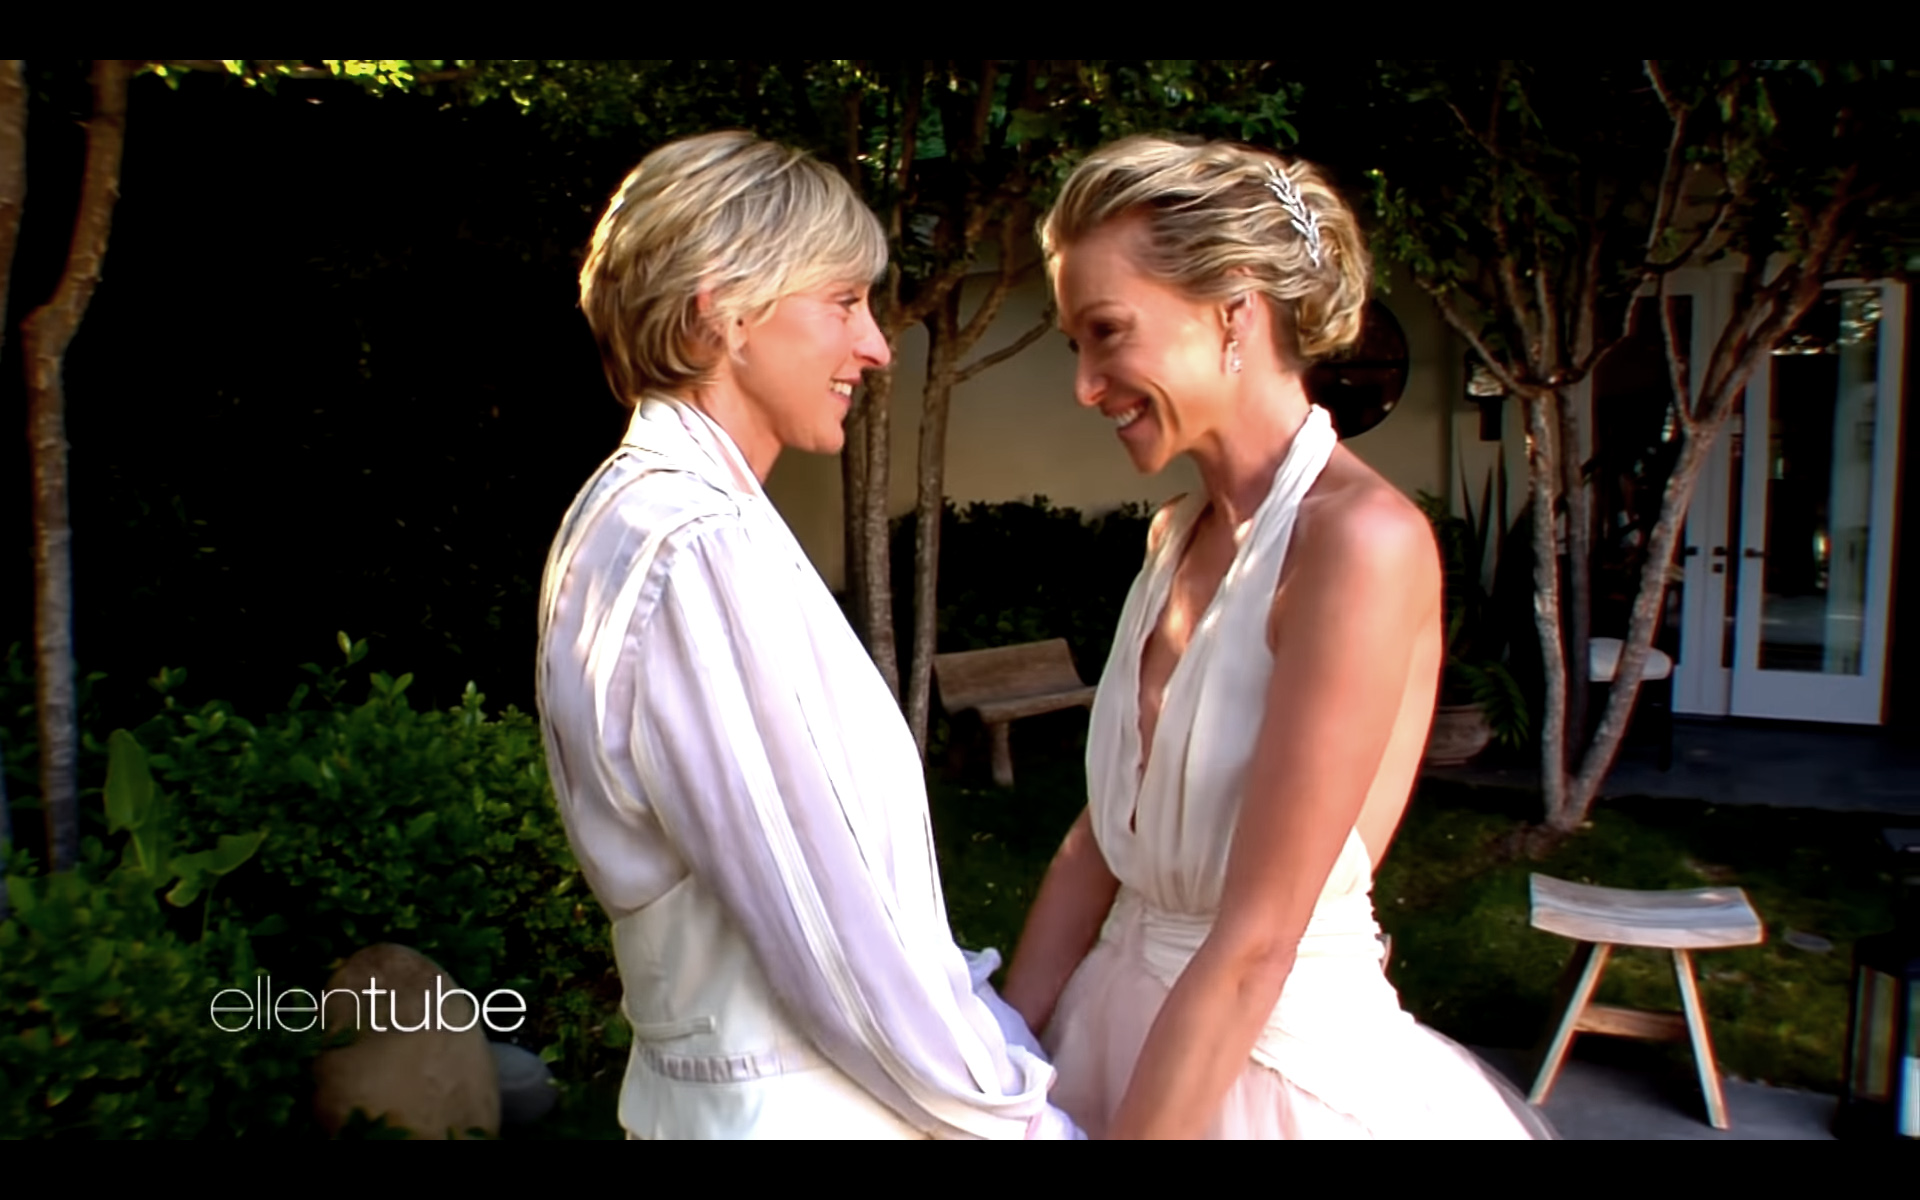 PHOTO: Ellen DeGeneres and Portia de Rossi are pictured in an image made from a video posted to YouTube on Aug. 16, 2018 with the title, "Revisit Ellen & Portia's Wedding Day on Their 10th Anniversary."